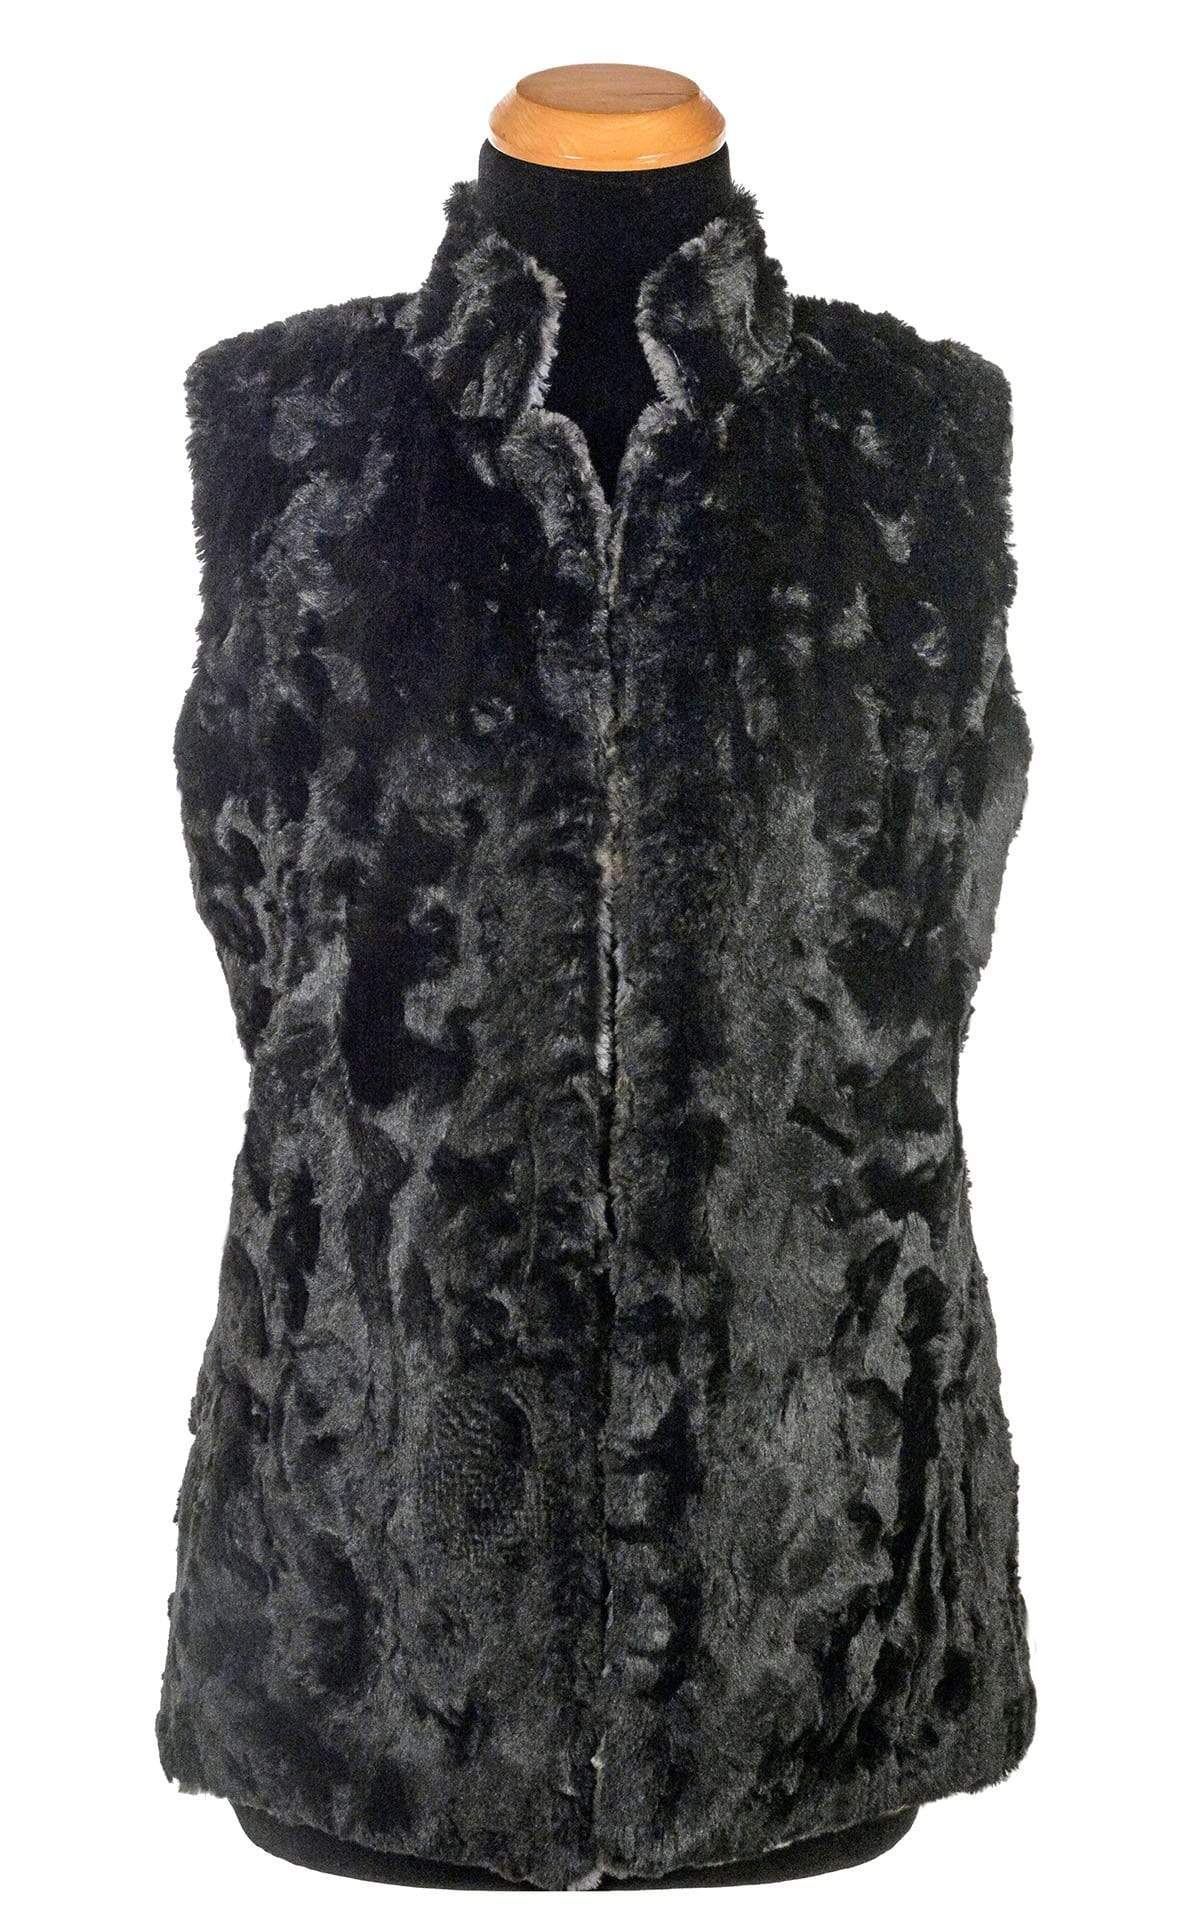 Mandarin Vest Short, Reversible less pockets - Luxury Faux Fur in Highland with Cuddly Fur